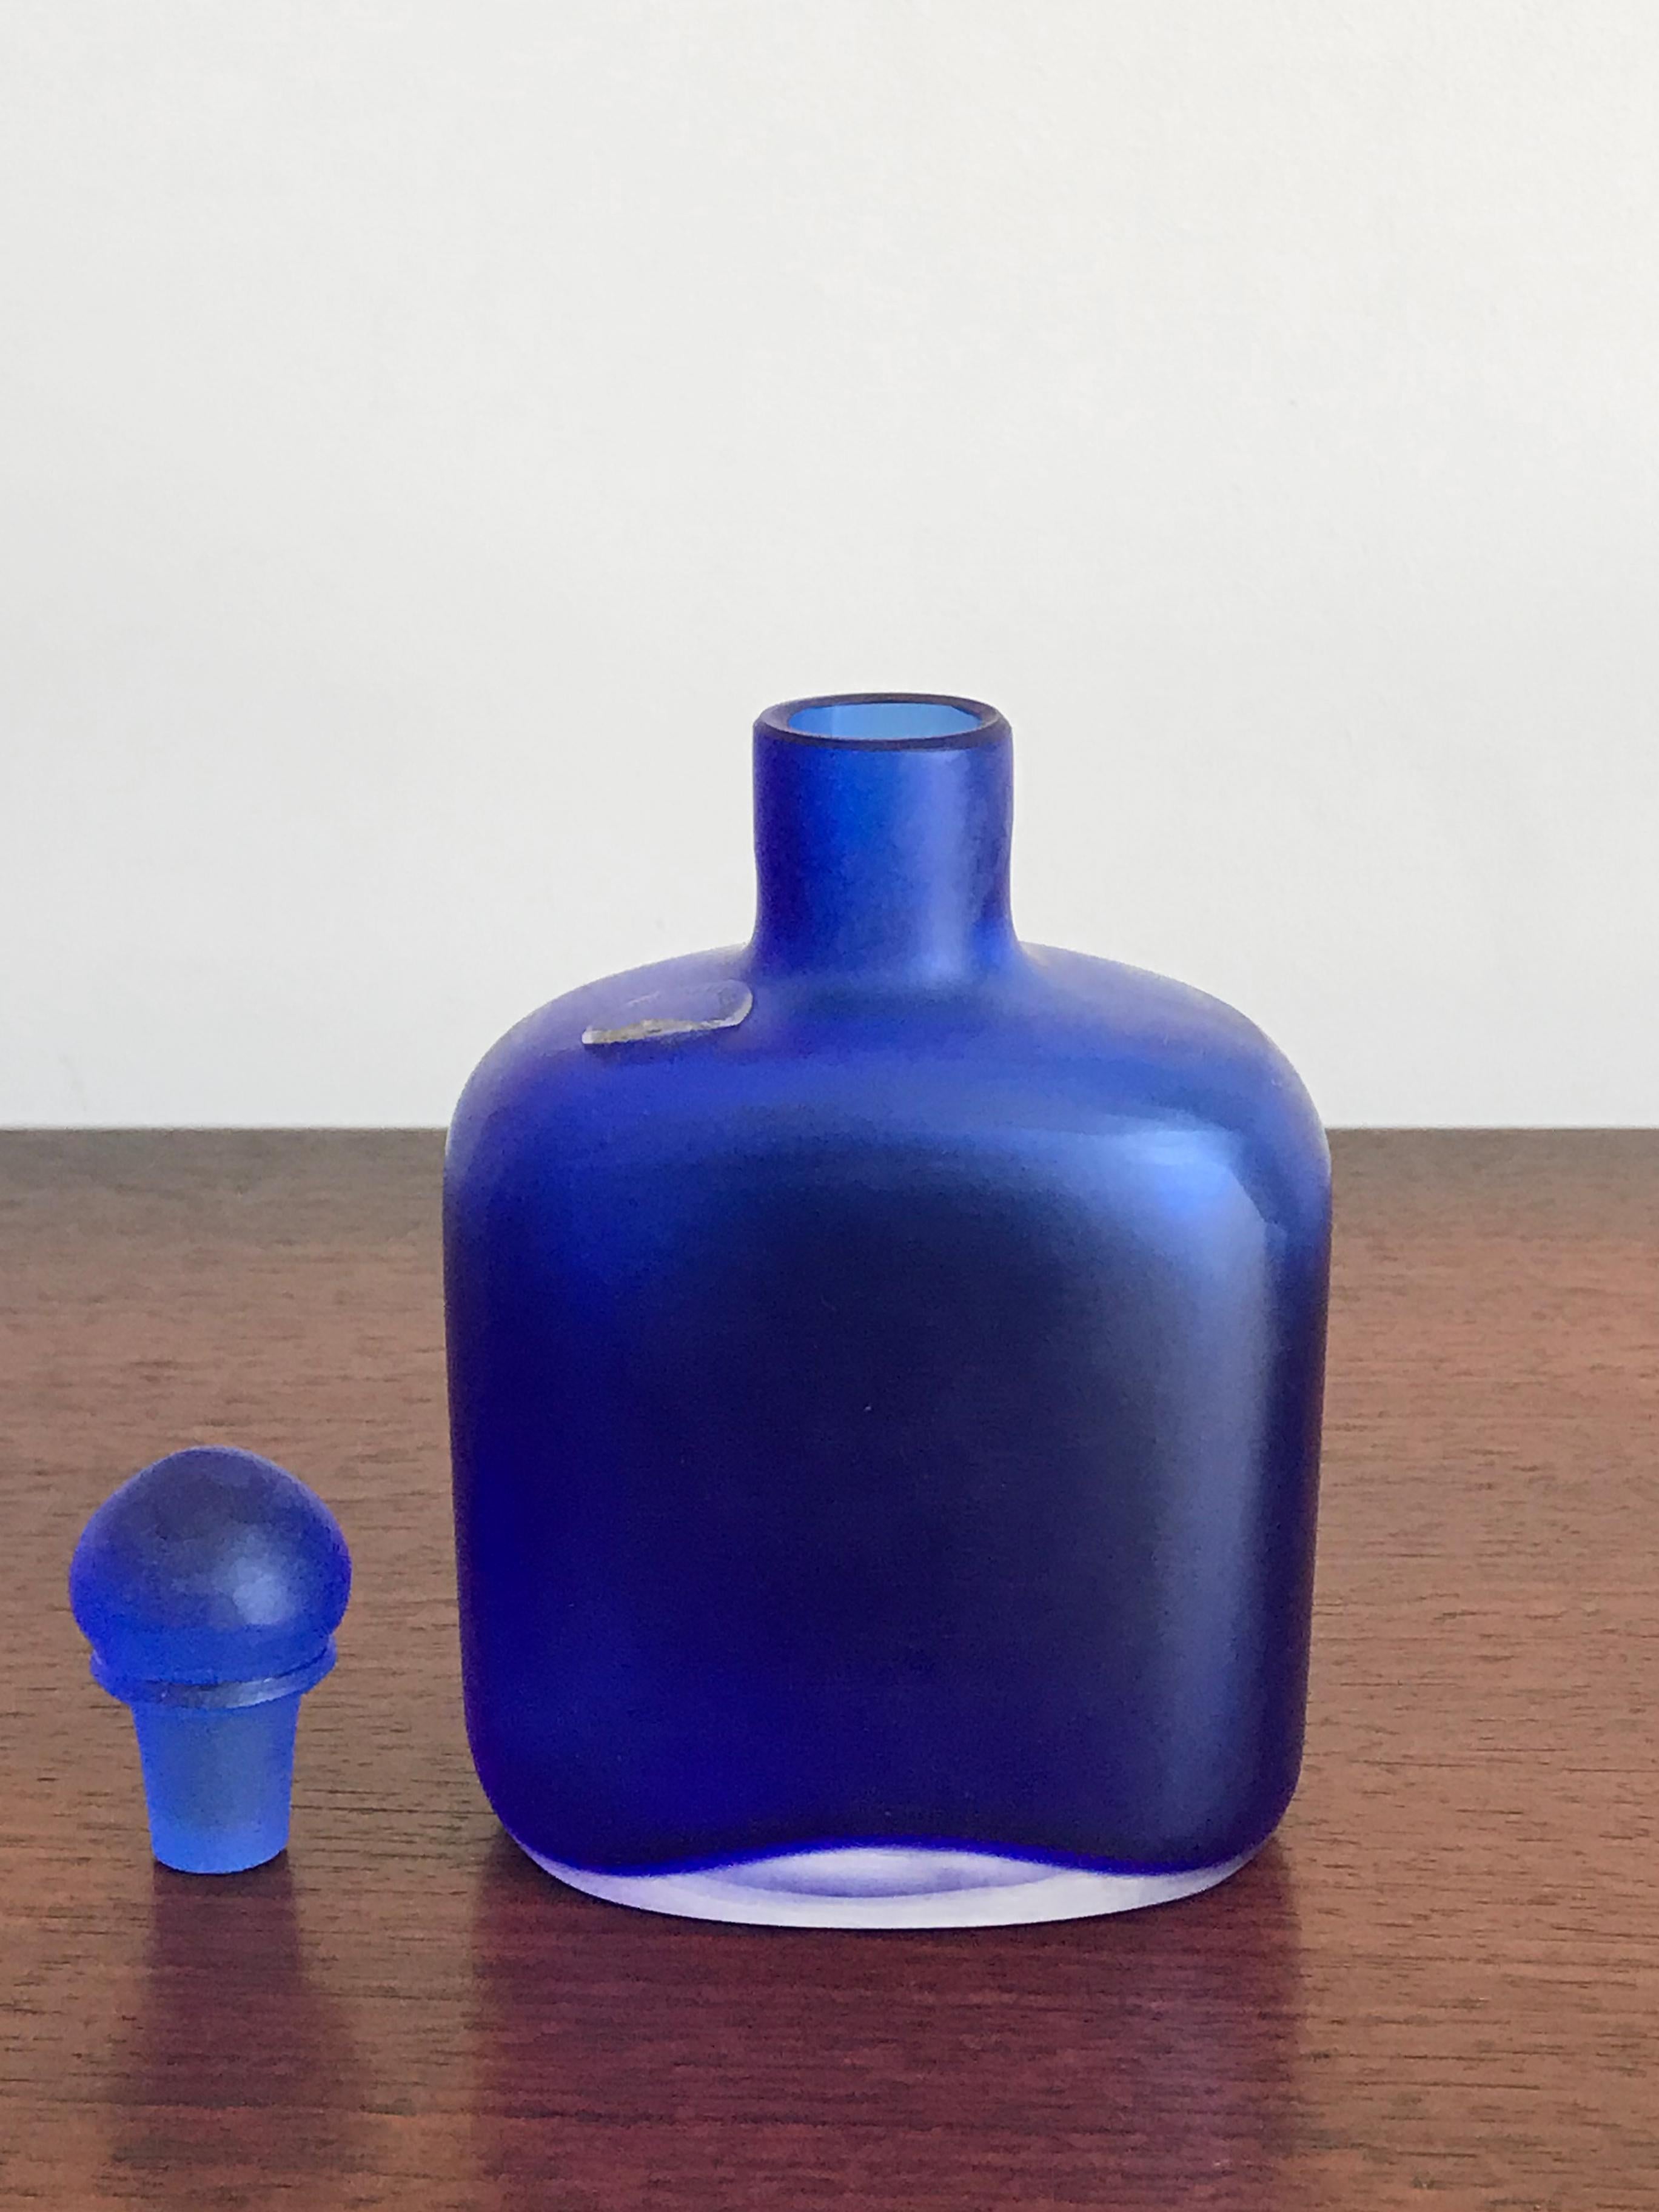 Amazing and fabulous very rare Italian handmade and blown bottle in bluette color glass with stopper, from the “Velati” series designed and produced by Venini Murano in 1995.

Logo Venini 1995 engraved by the producer on the bottom.
 